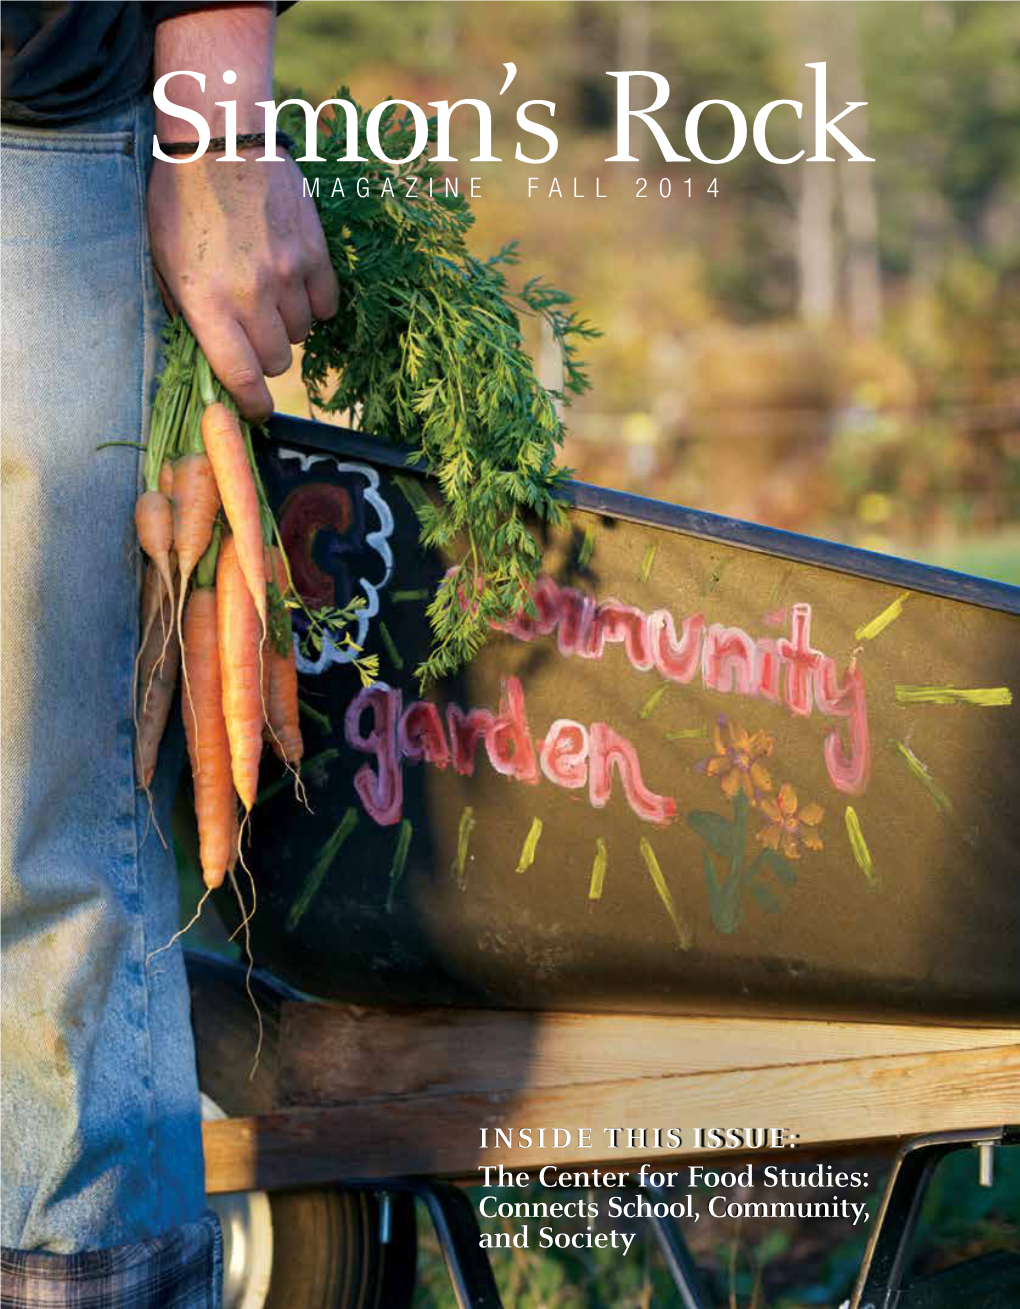 The Center for Food Studies: Connects School, Community, and Society in This Issue